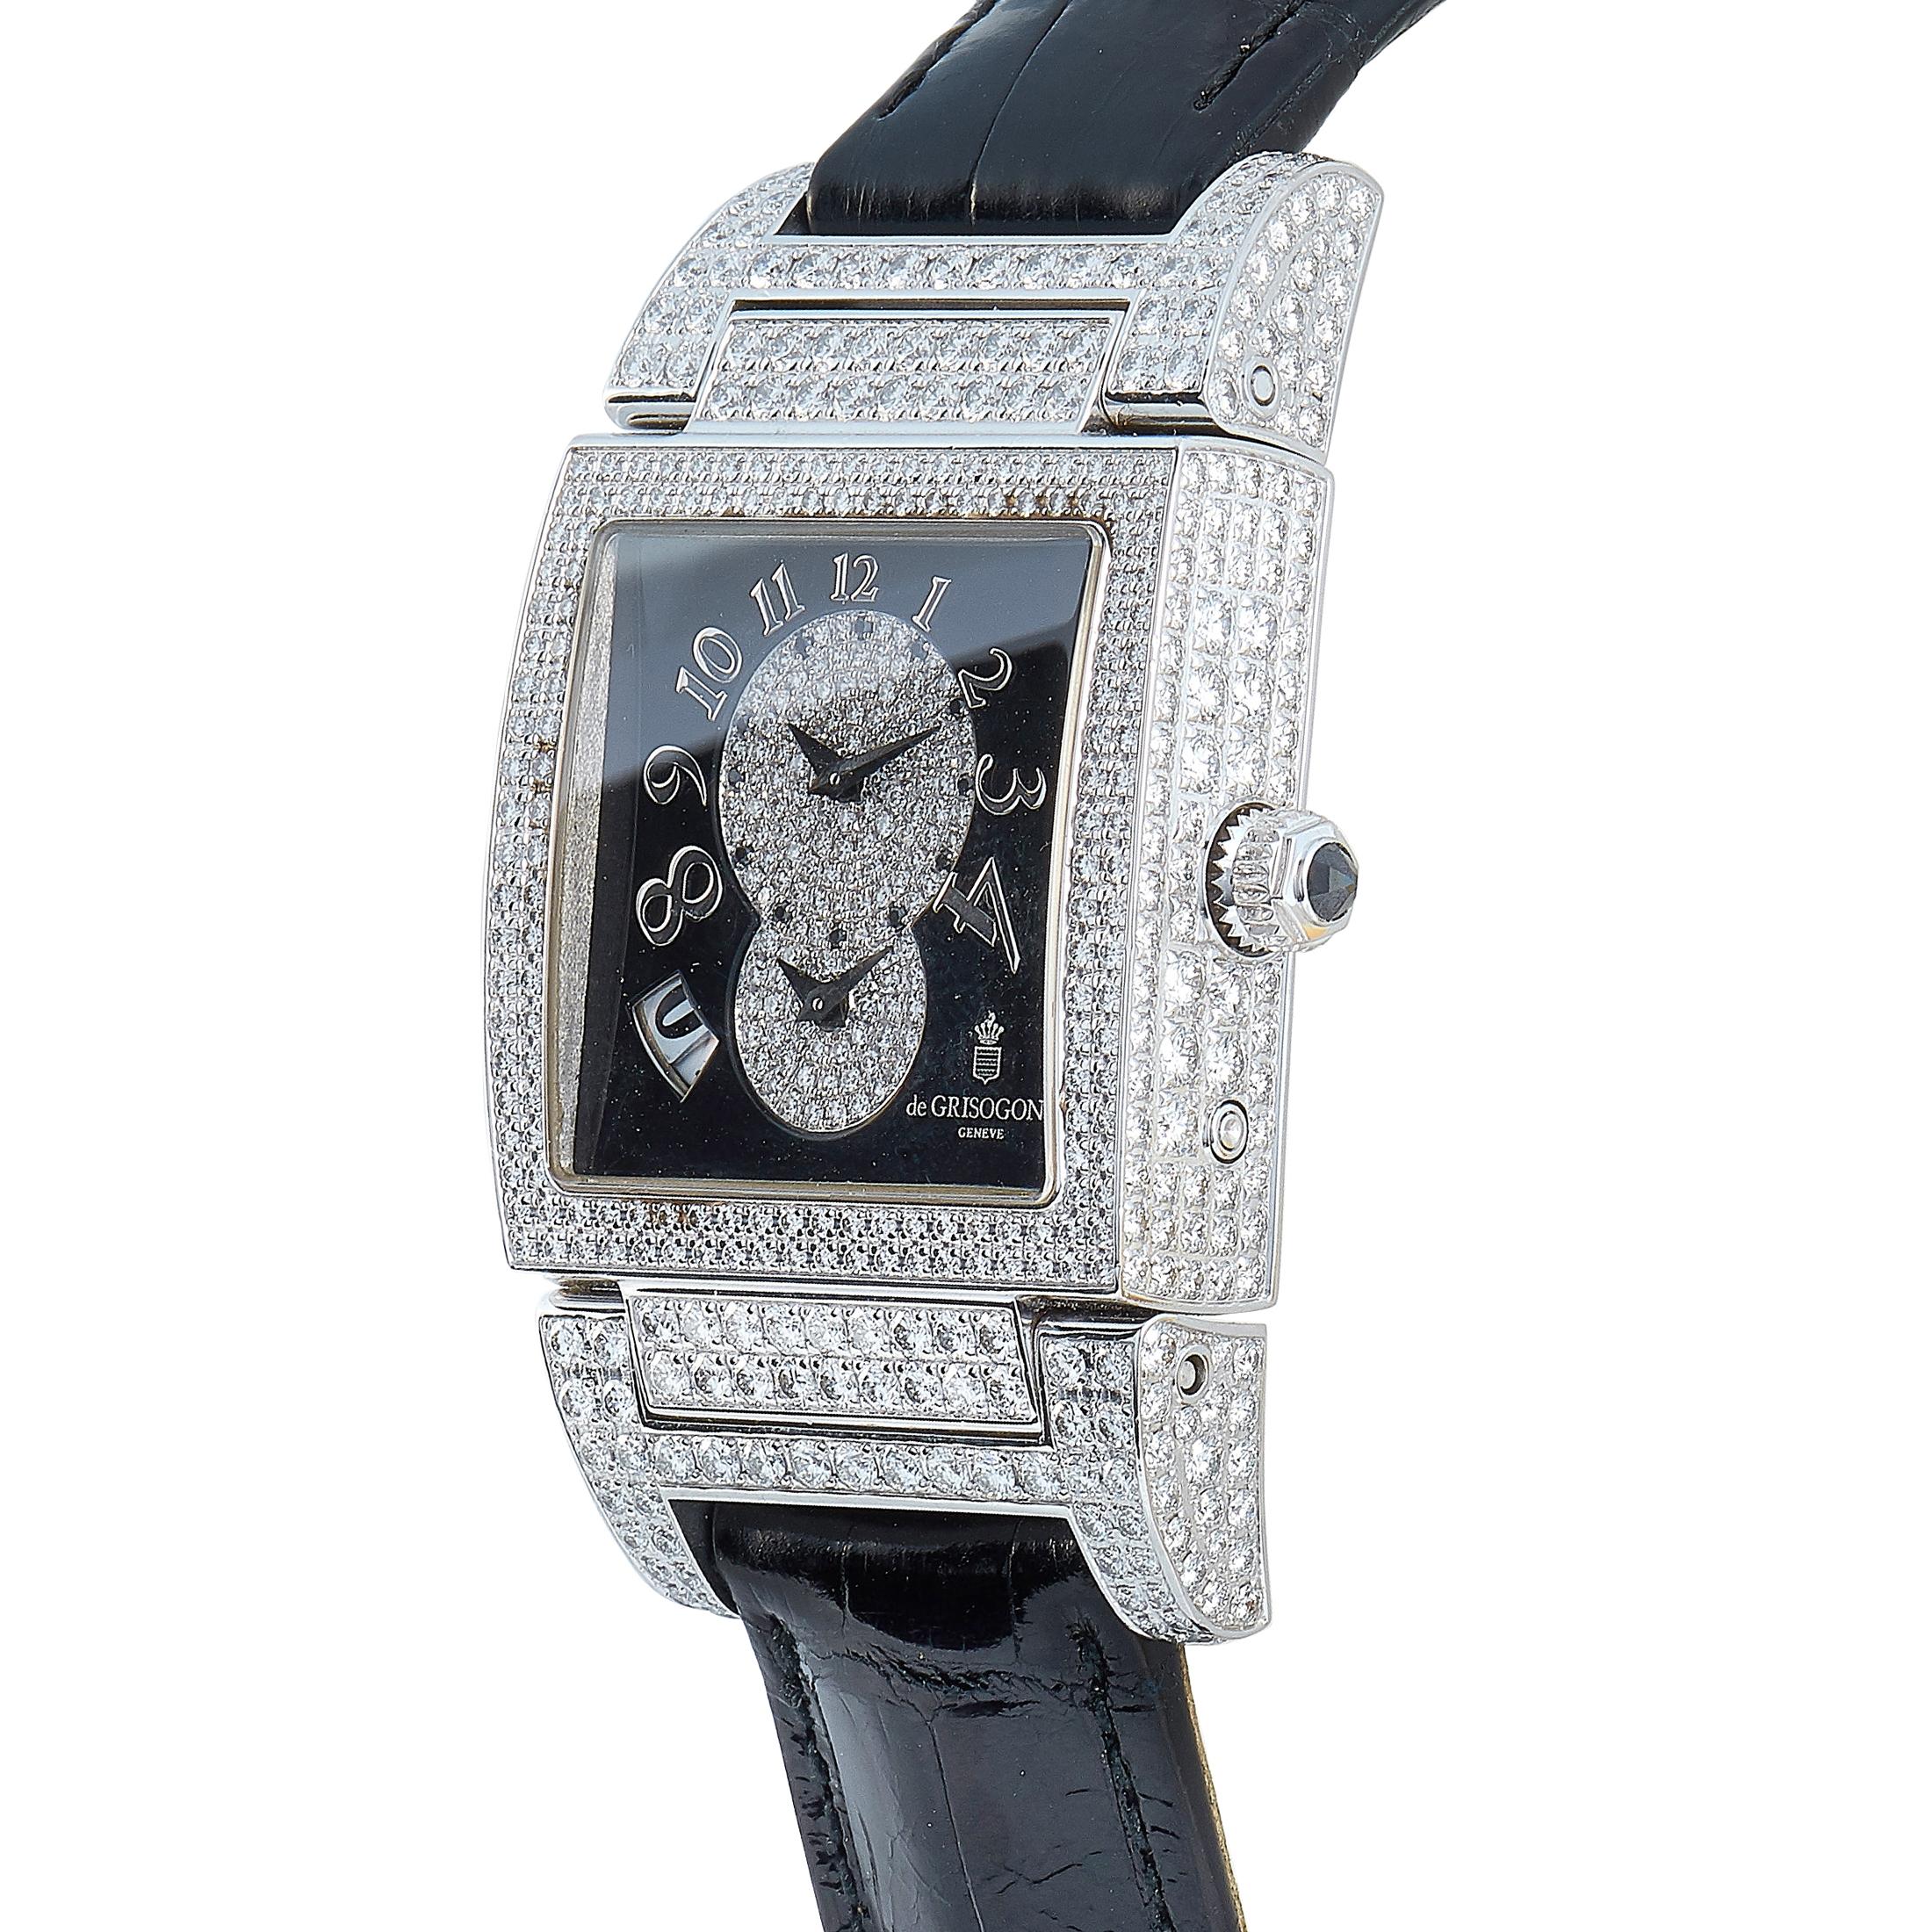 The de Grisogono Instrumento N°Uno watch, reference number TINO S10, is presented with a diamond-set 18K white gold case that boasts see-through back. This timepiece is powered by a self-winding movement and features the following functions on the